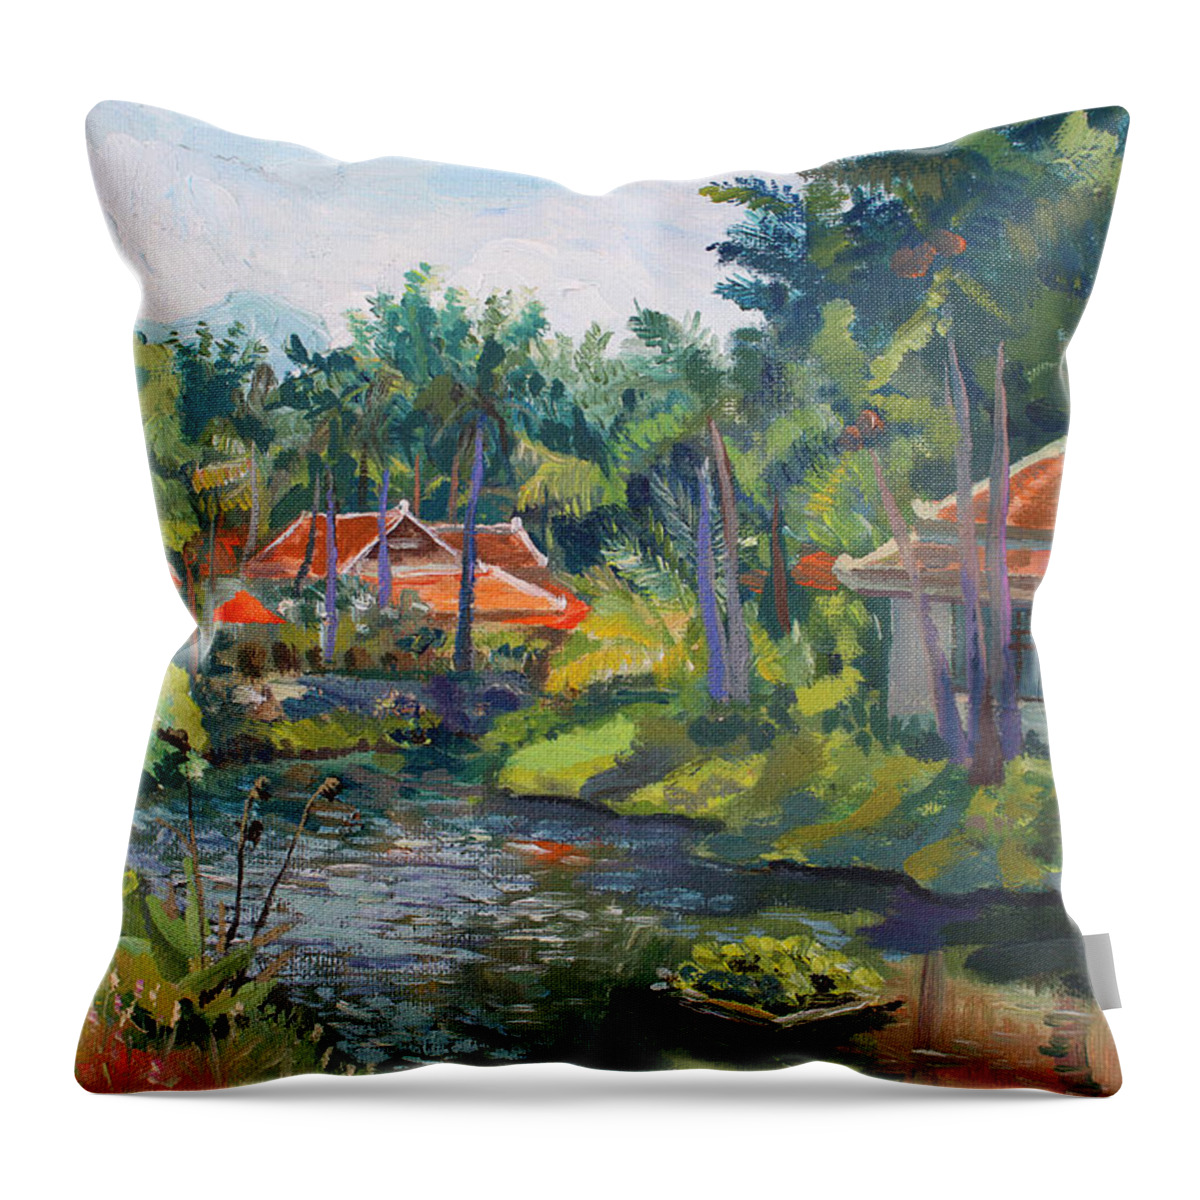 Thailand Throw Pillow featuring the painting Samui Life by Alina MalyKhina